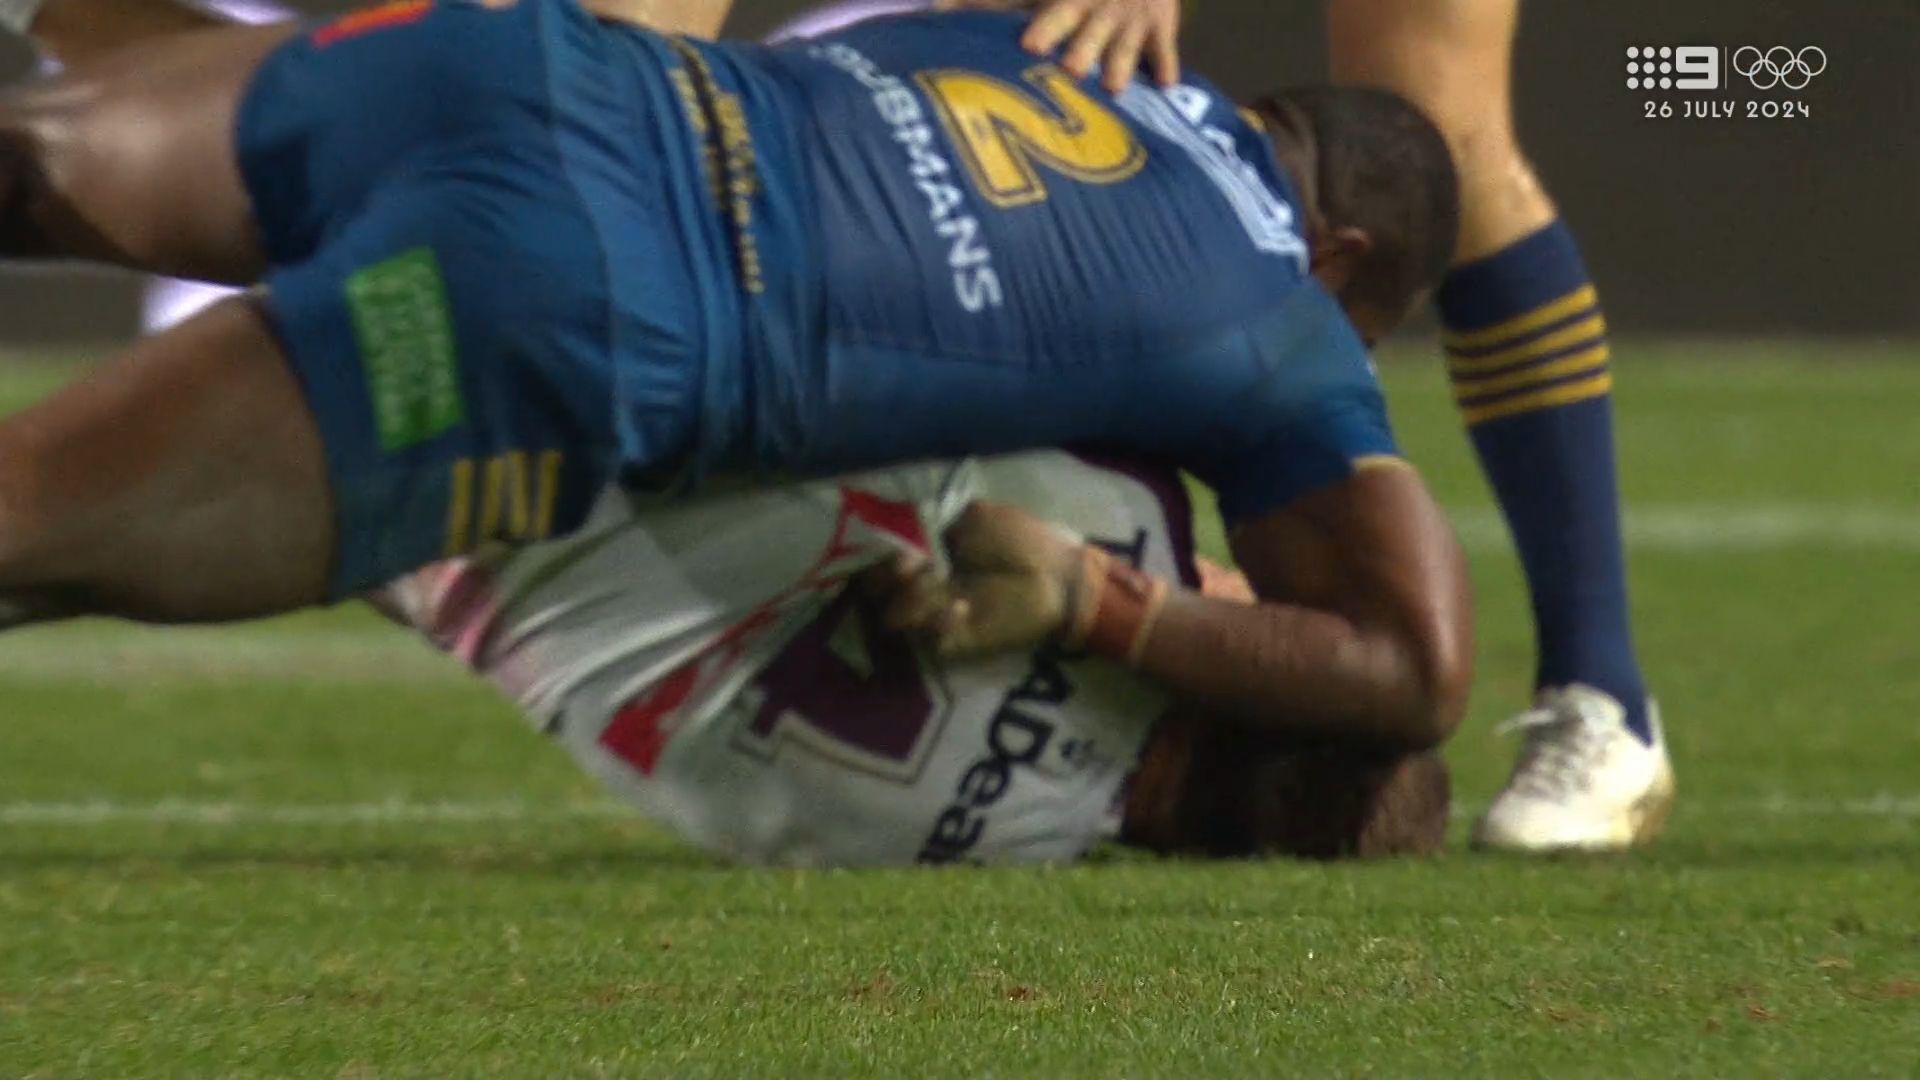 'It was just stupid': Brad Arthur, Clint Gutherson lament 'dumb' moment as Eels woes continue